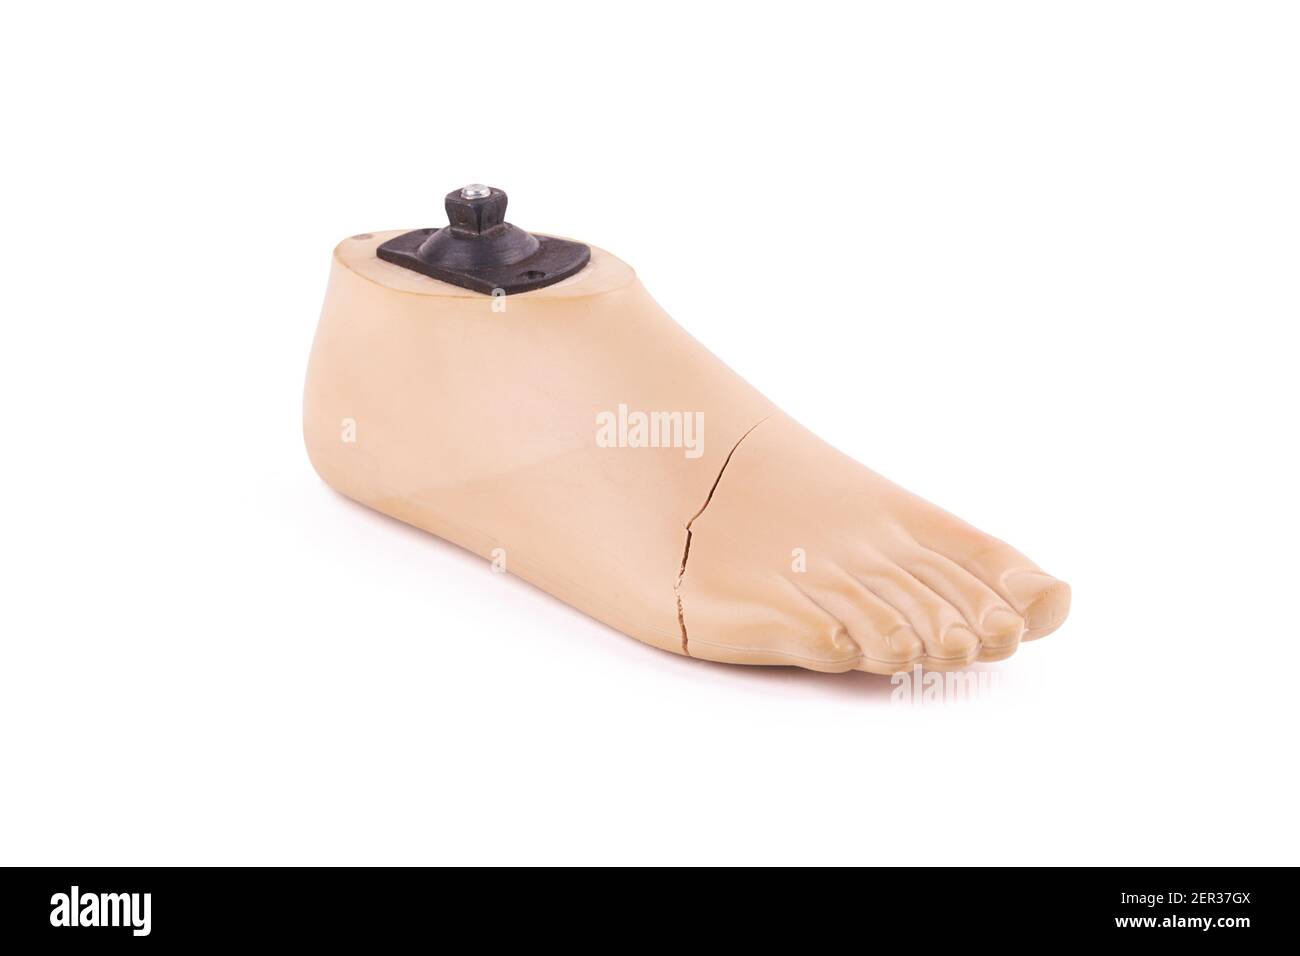 broken prosthetic foot isolated on a white background Stock Photo